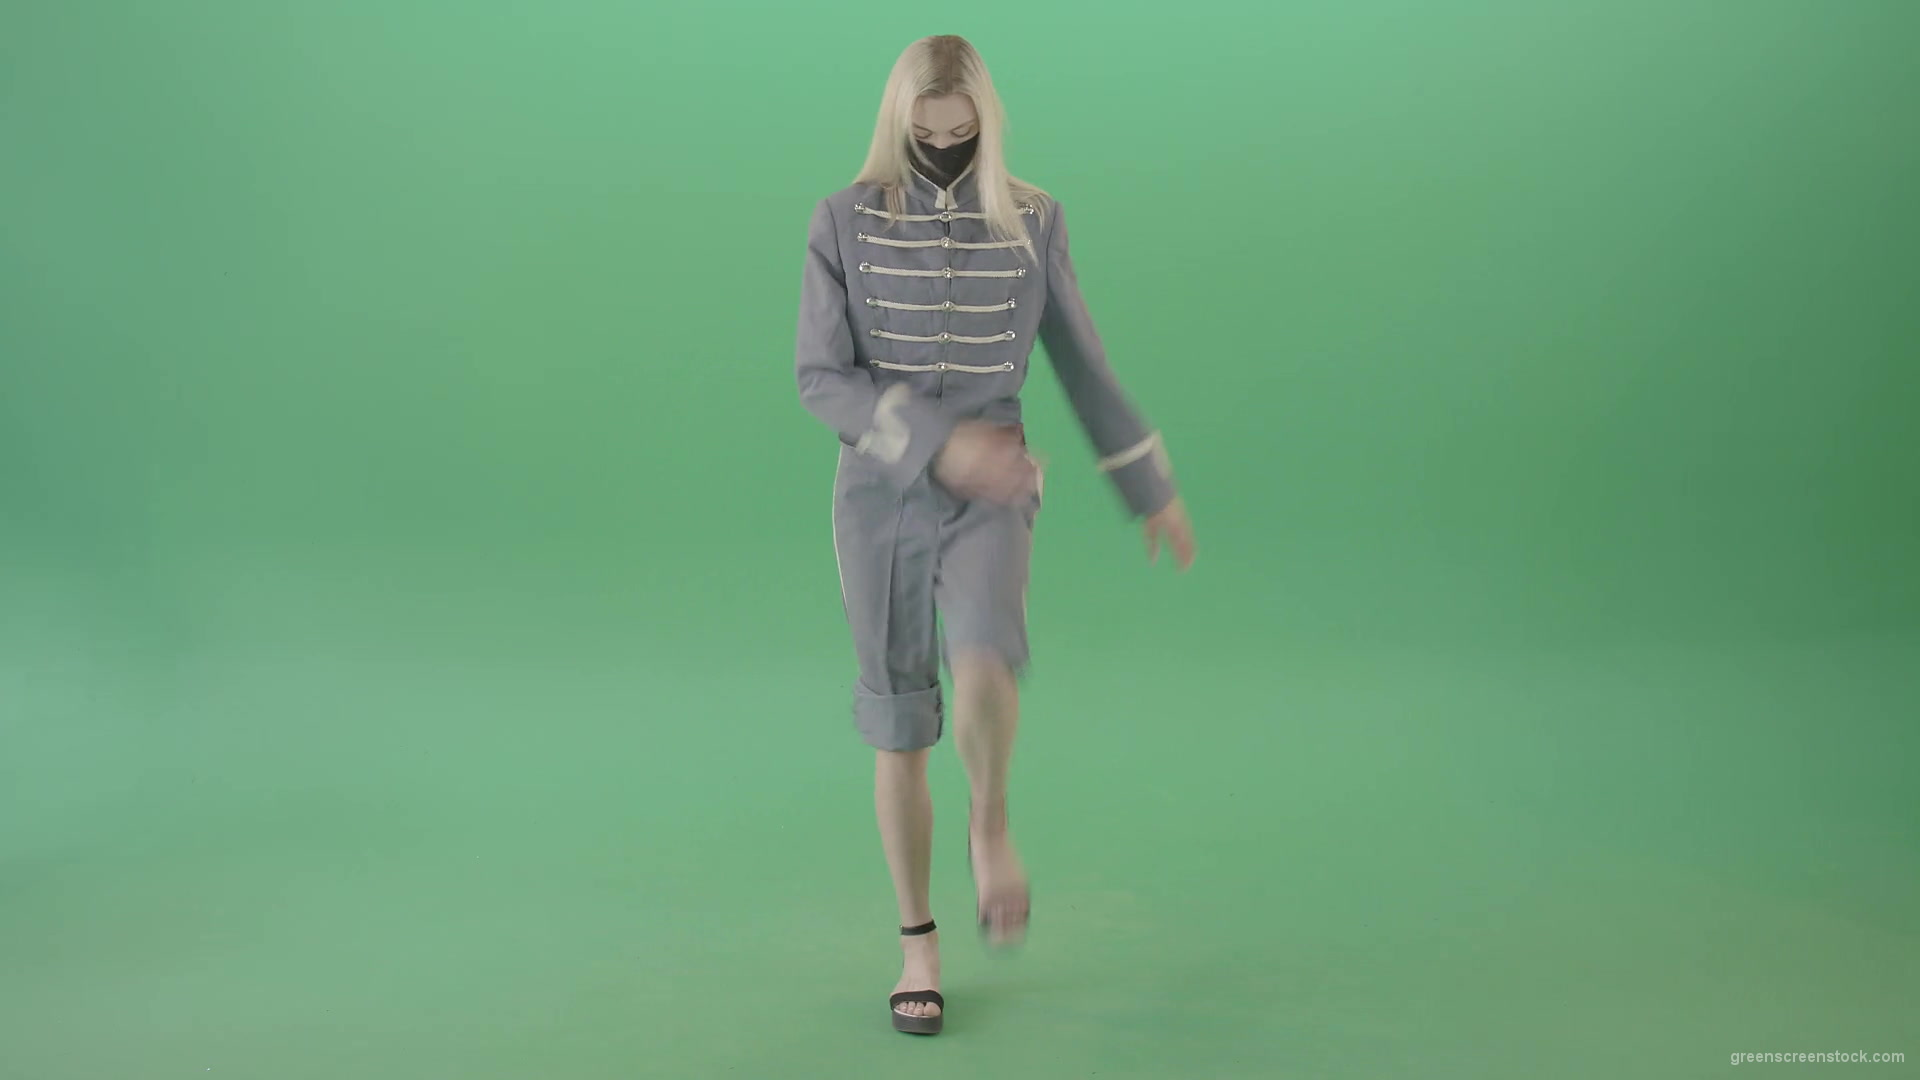 Female-yound-blonde-girl-in-black-mask-and-military-old-uniform-marching-in-front-over-green-screen-4K-Video-Footage-1920_004 Green Screen Stock